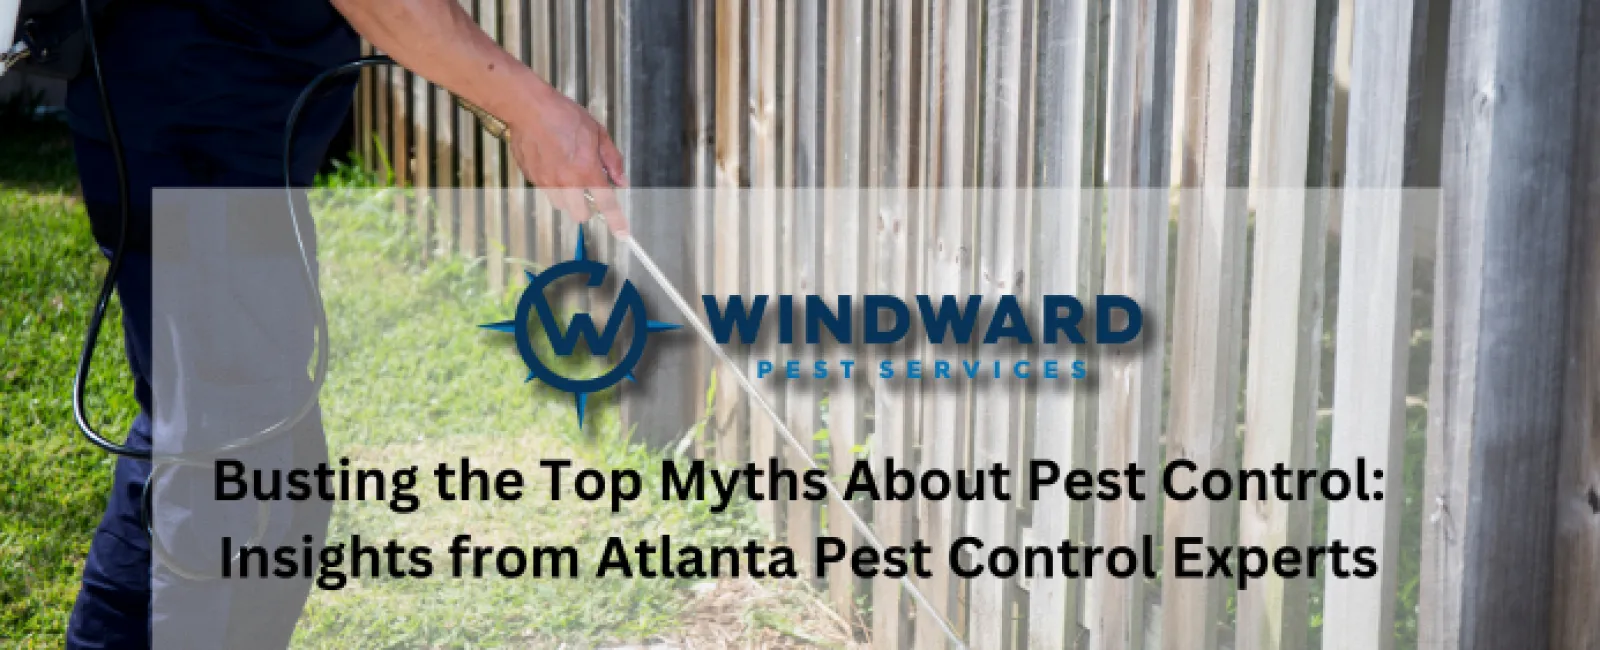 Busting the Top Myths About Pest Control: Insights from Atlanta Pest Control Experts